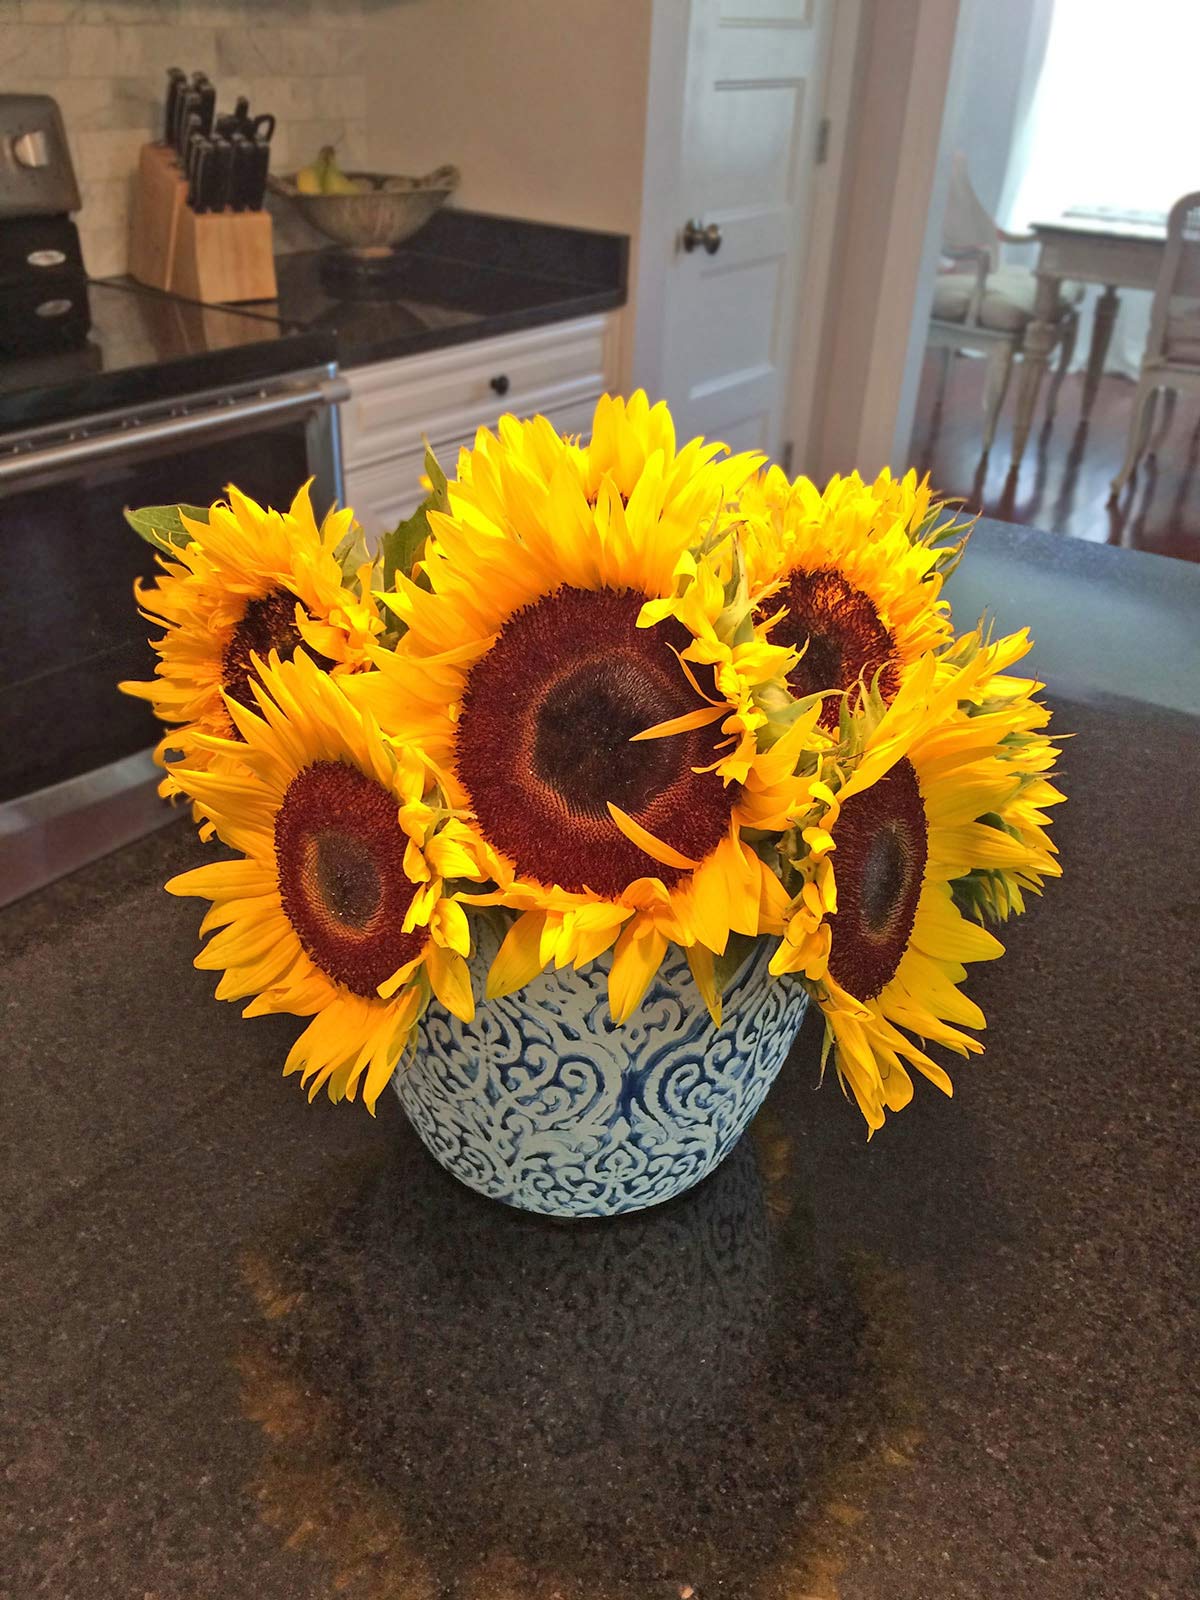 A vase filled with yellow sunflowers.